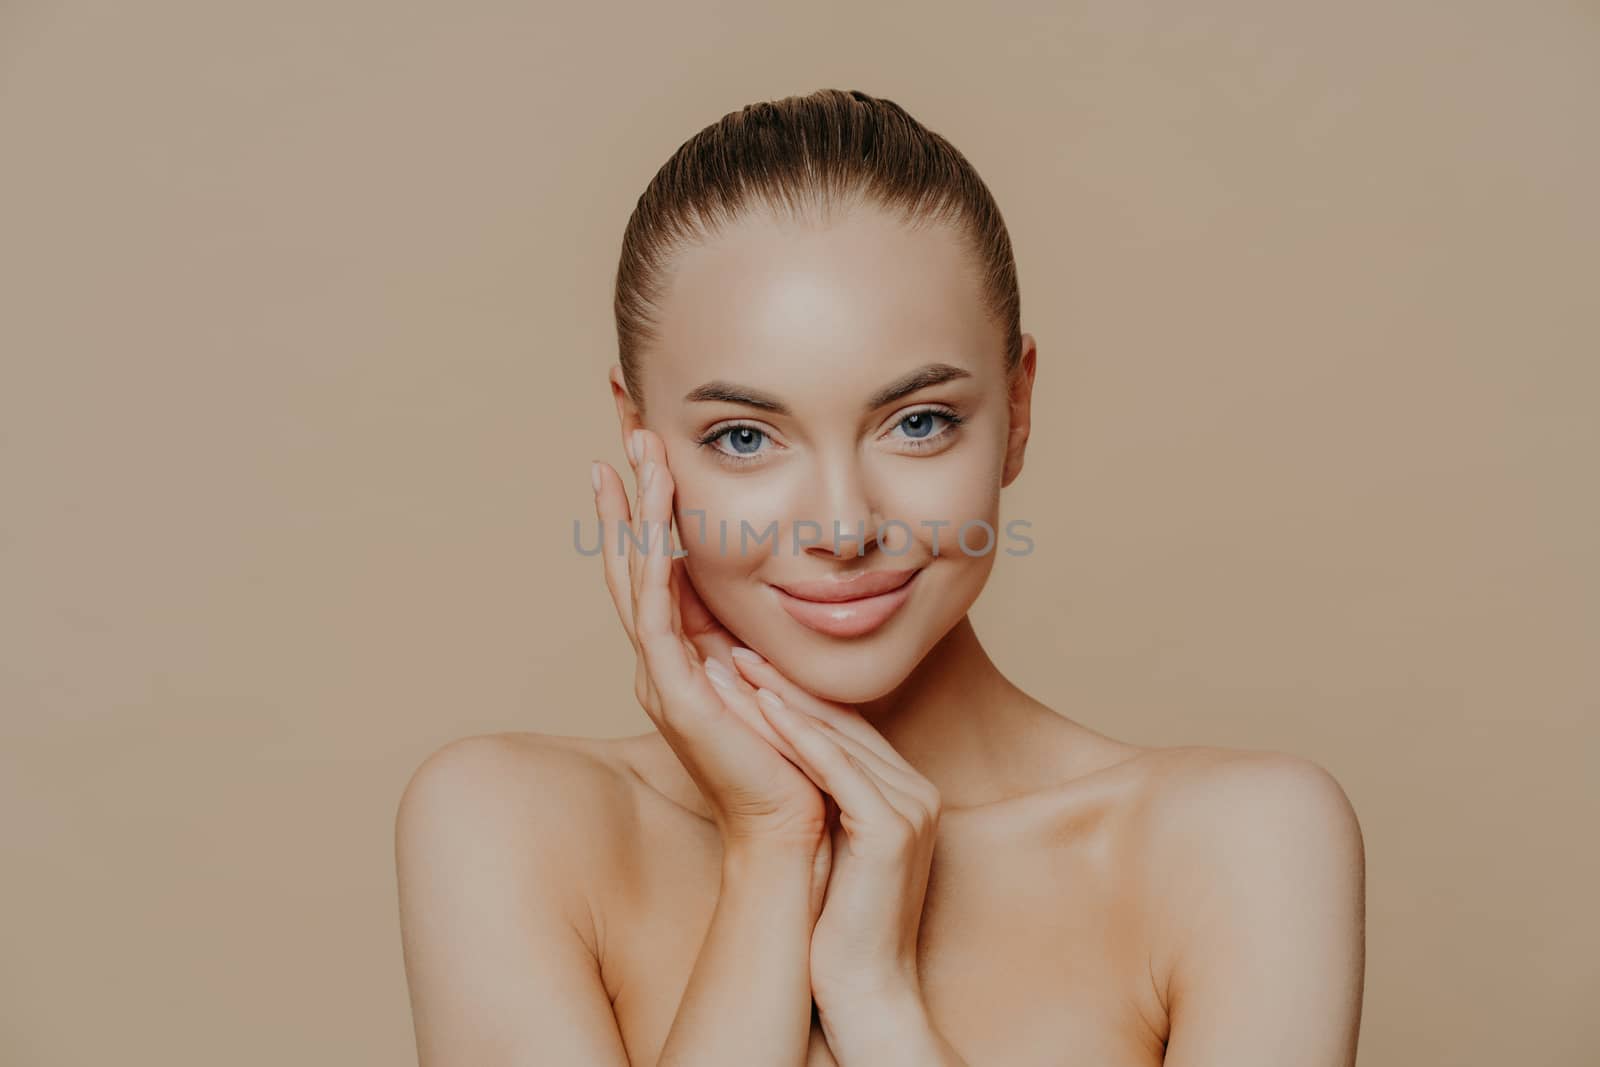 Natural beauty portrait. Photo of young woman enjoys perfect fresh skin after visiting cosmetologist, smiles gently, poses naked against beige background, touches face, wears minimal makeup. by vkstock